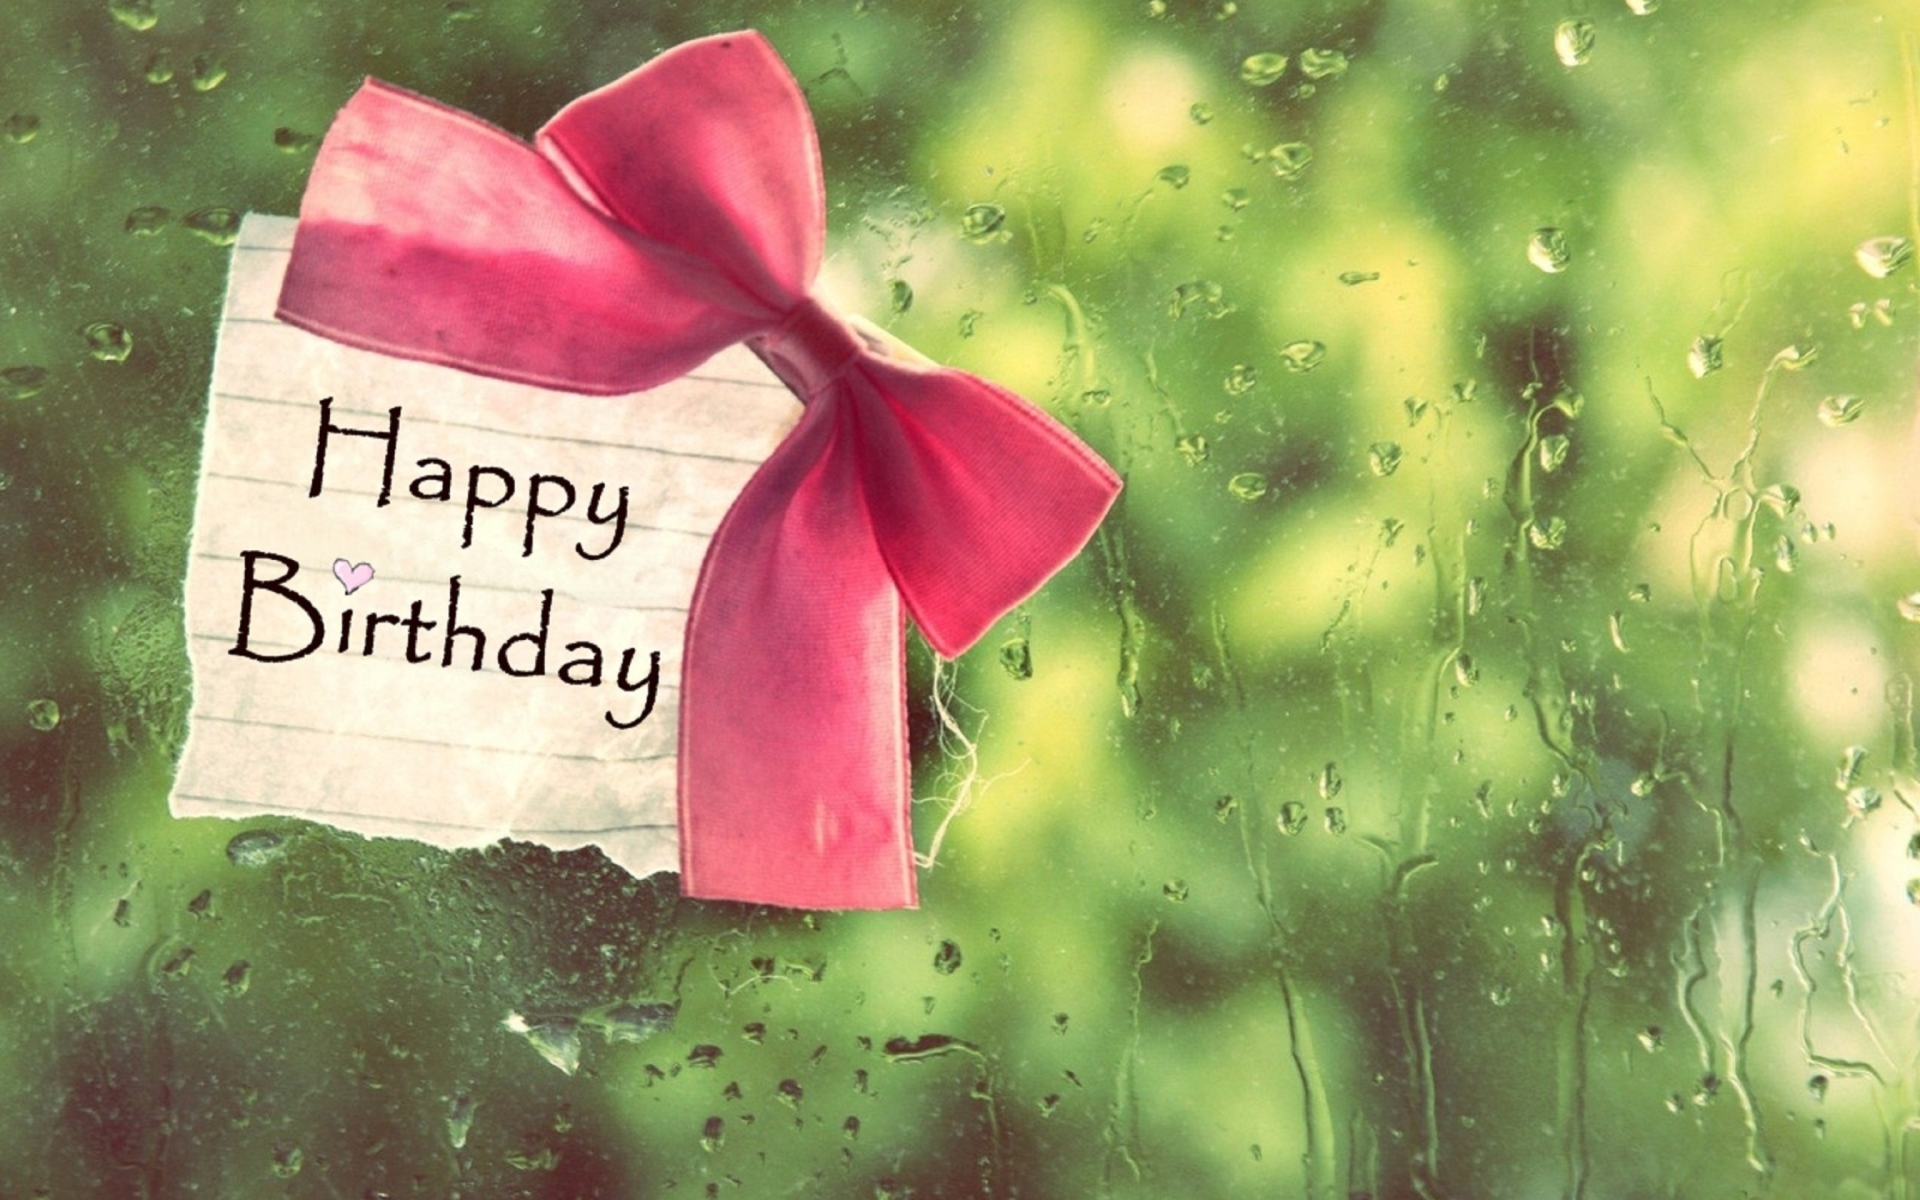 Happy Birthday Background Images Hd - 1920x1200 Wallpaper 